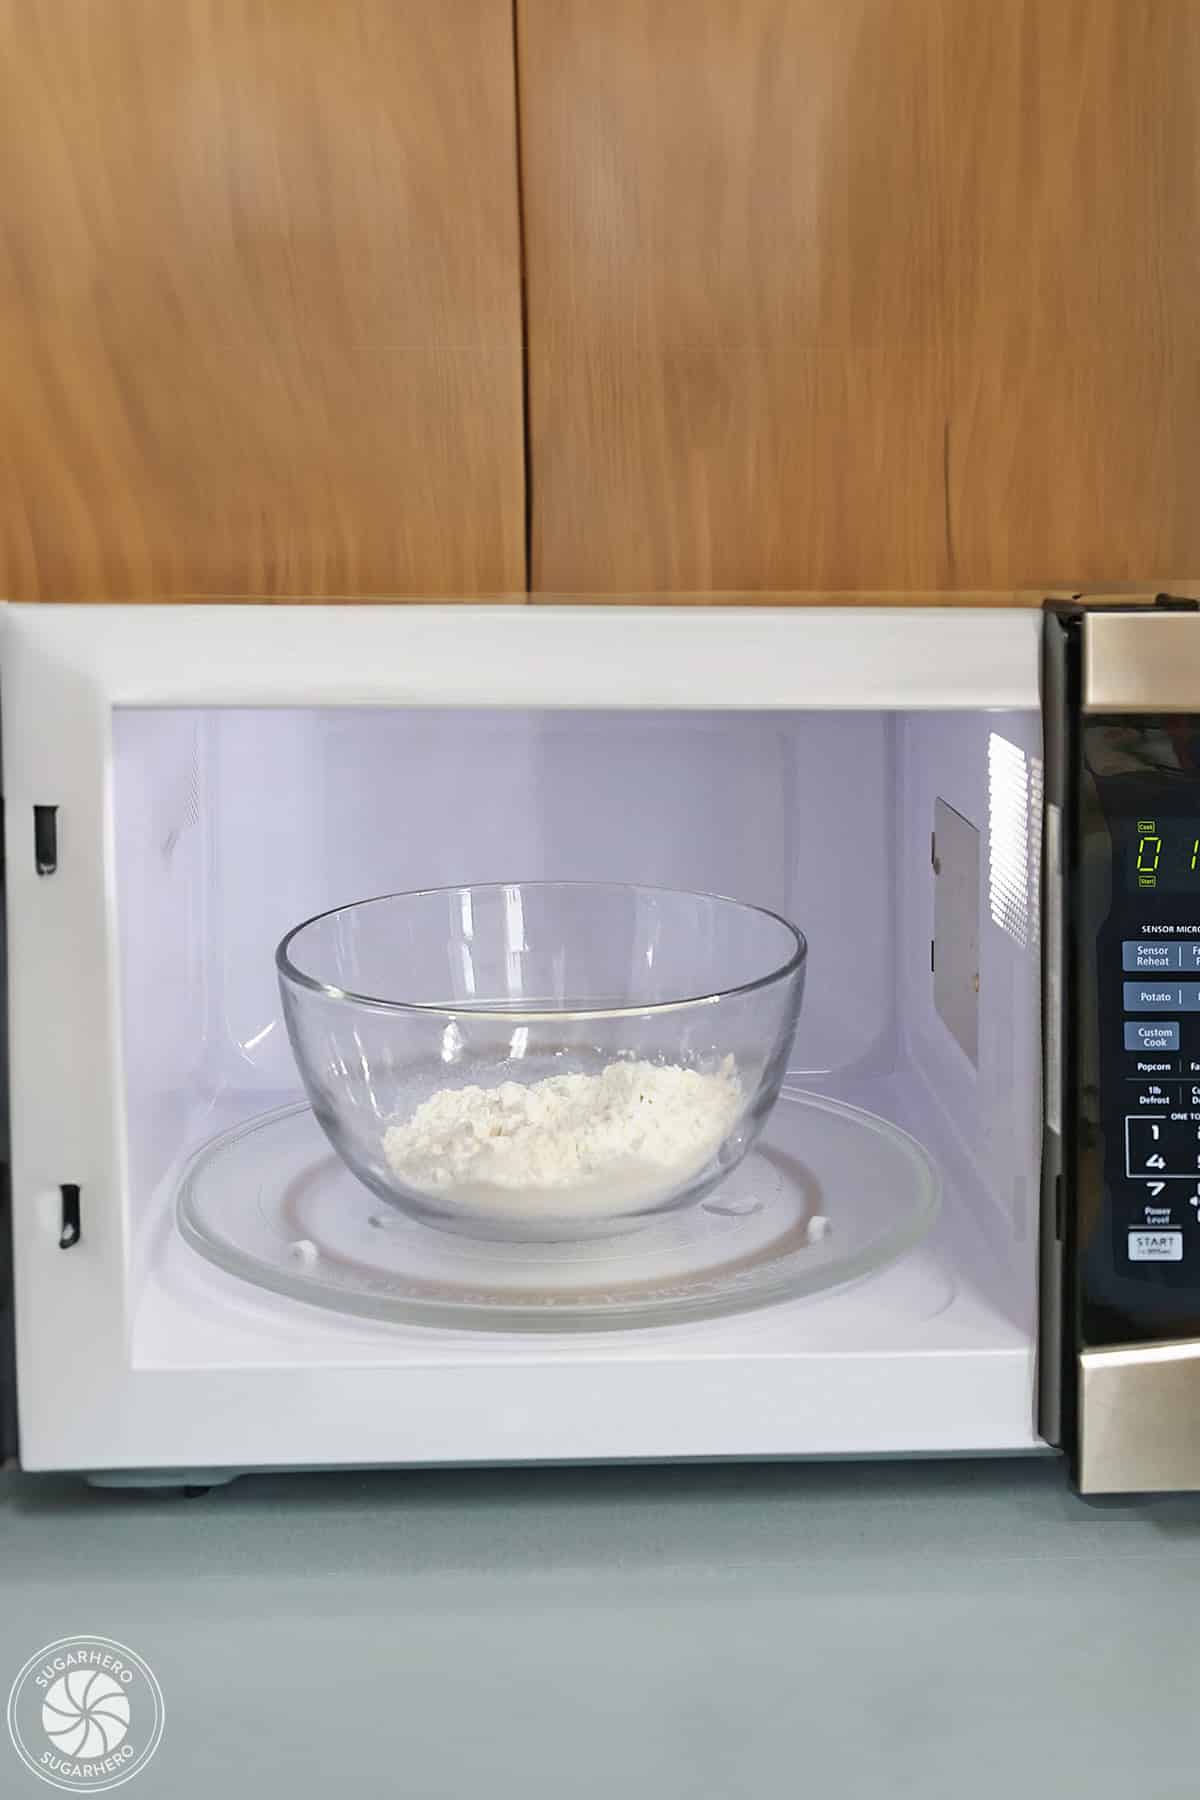 A bowl of flour in a microwave.